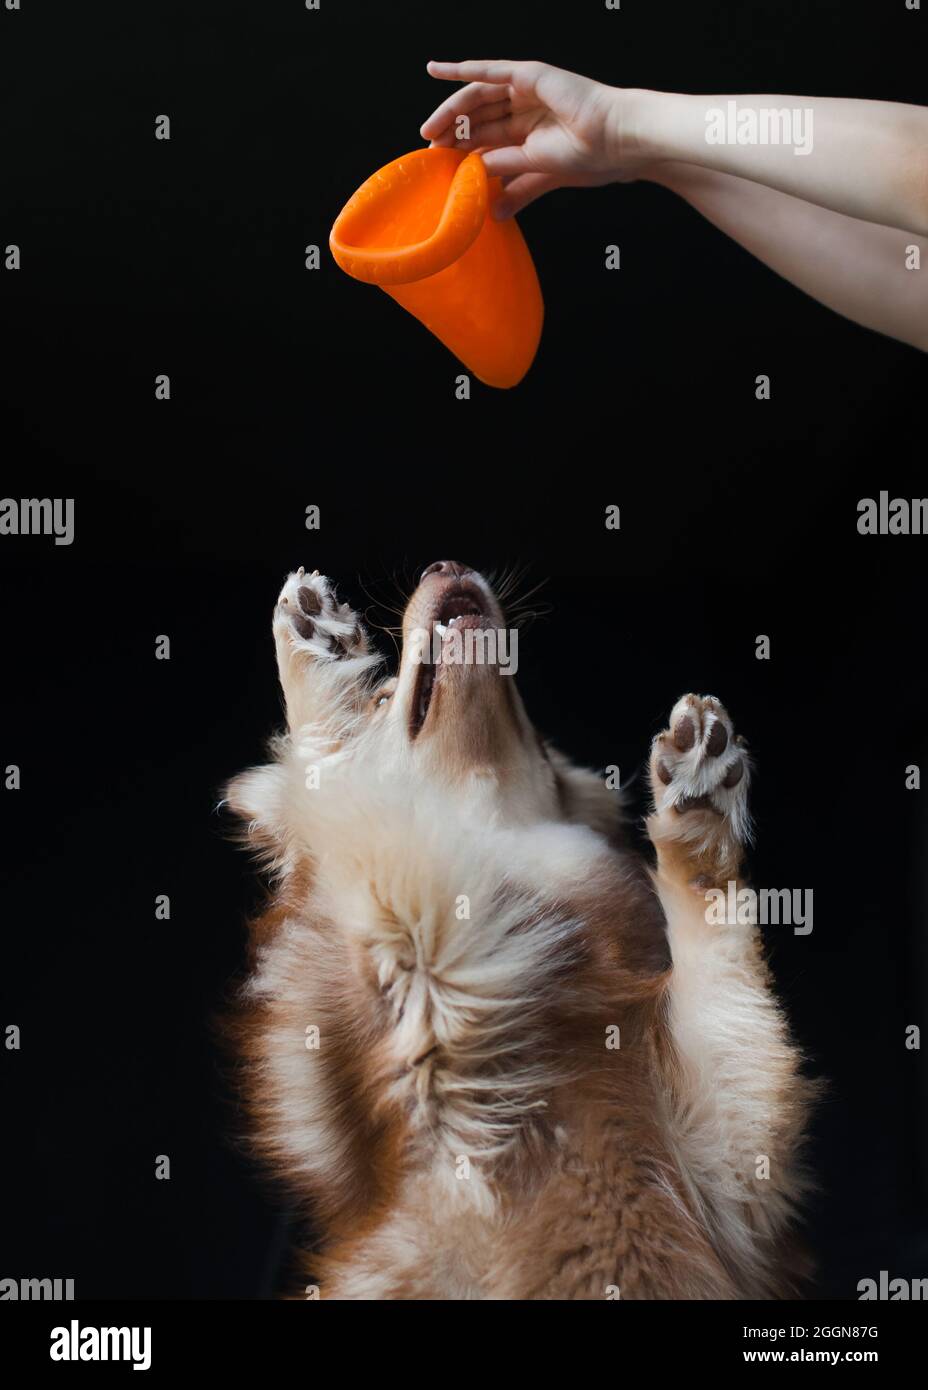 Hands of child holding an orange dog toy and a dog jumping up, trying to reach the toy. Playing. Paws in the front, black background. Stock Photo